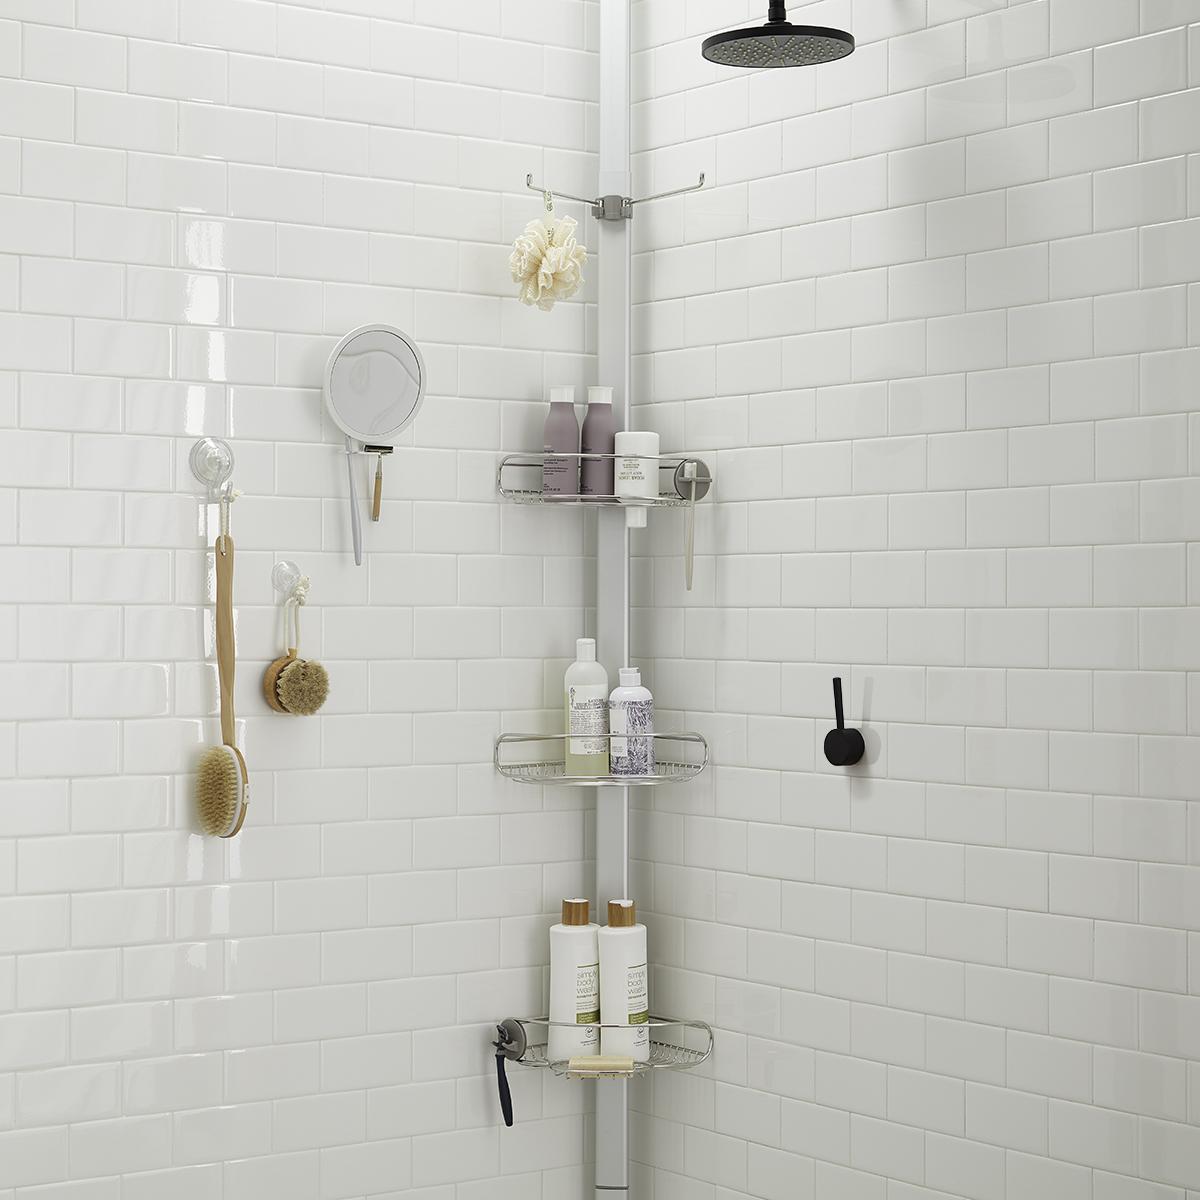 https://www.containerstore.com/catalogimages/363877/Shower-Cady_RGB_Handle-LAYERED.jpg